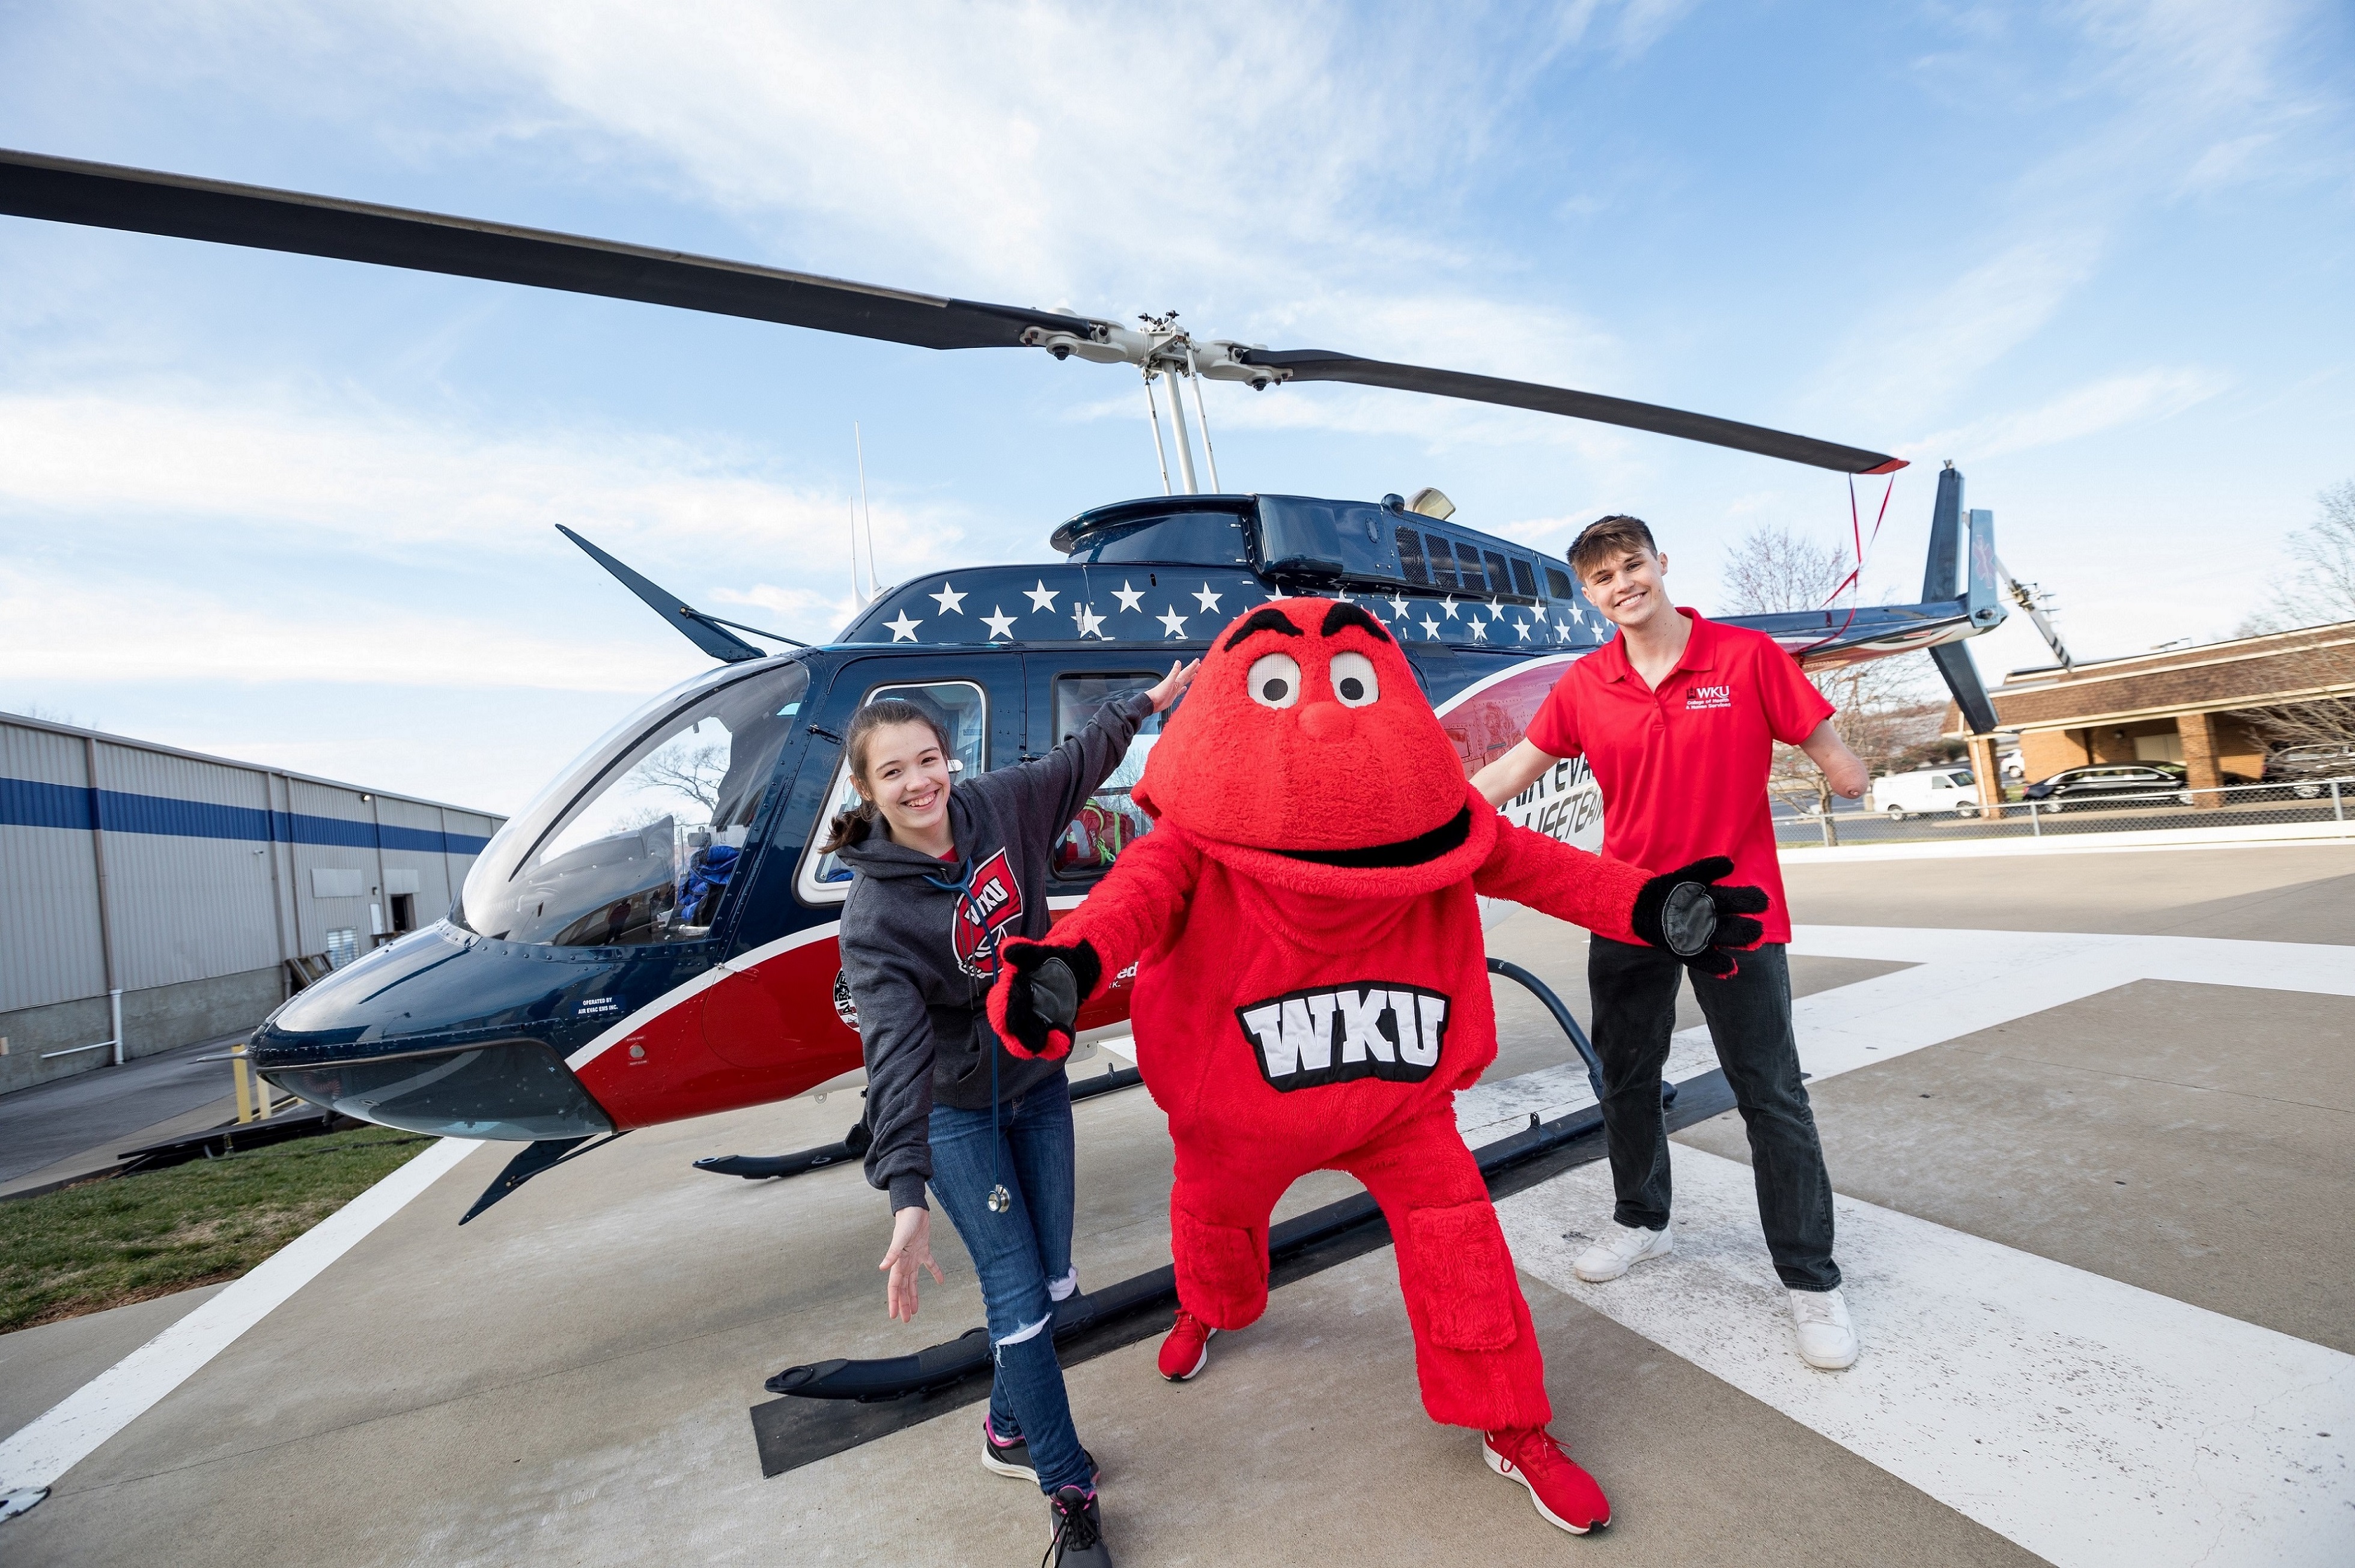 Big Red with Students by Helicopter